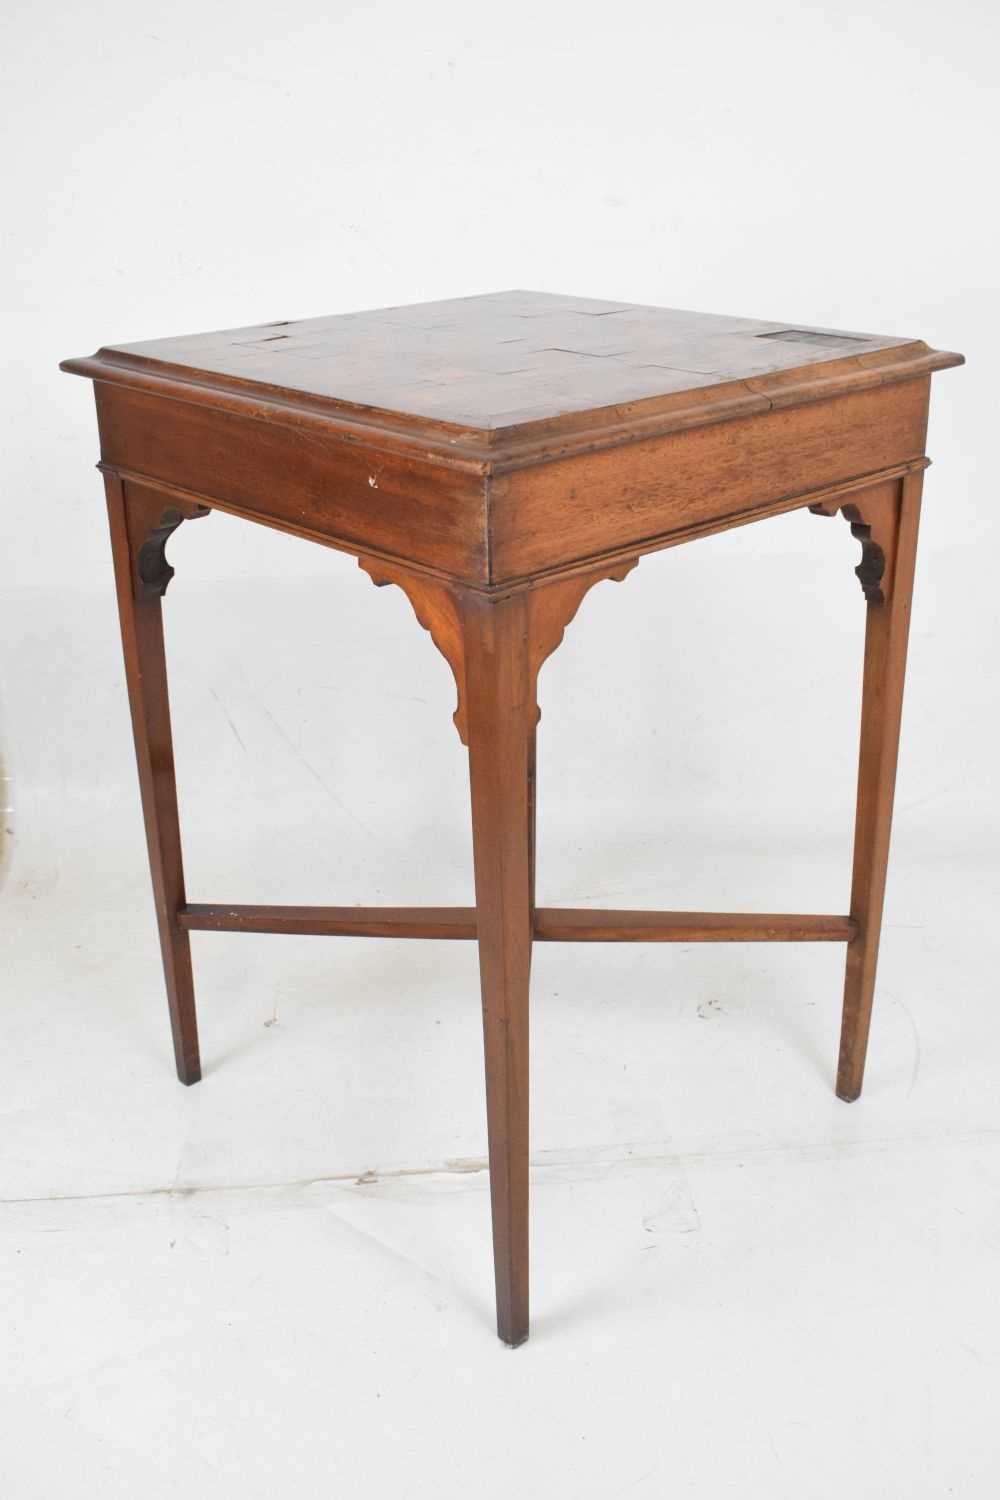 Early 19th Century inlaid walnut games table - Image 6 of 9